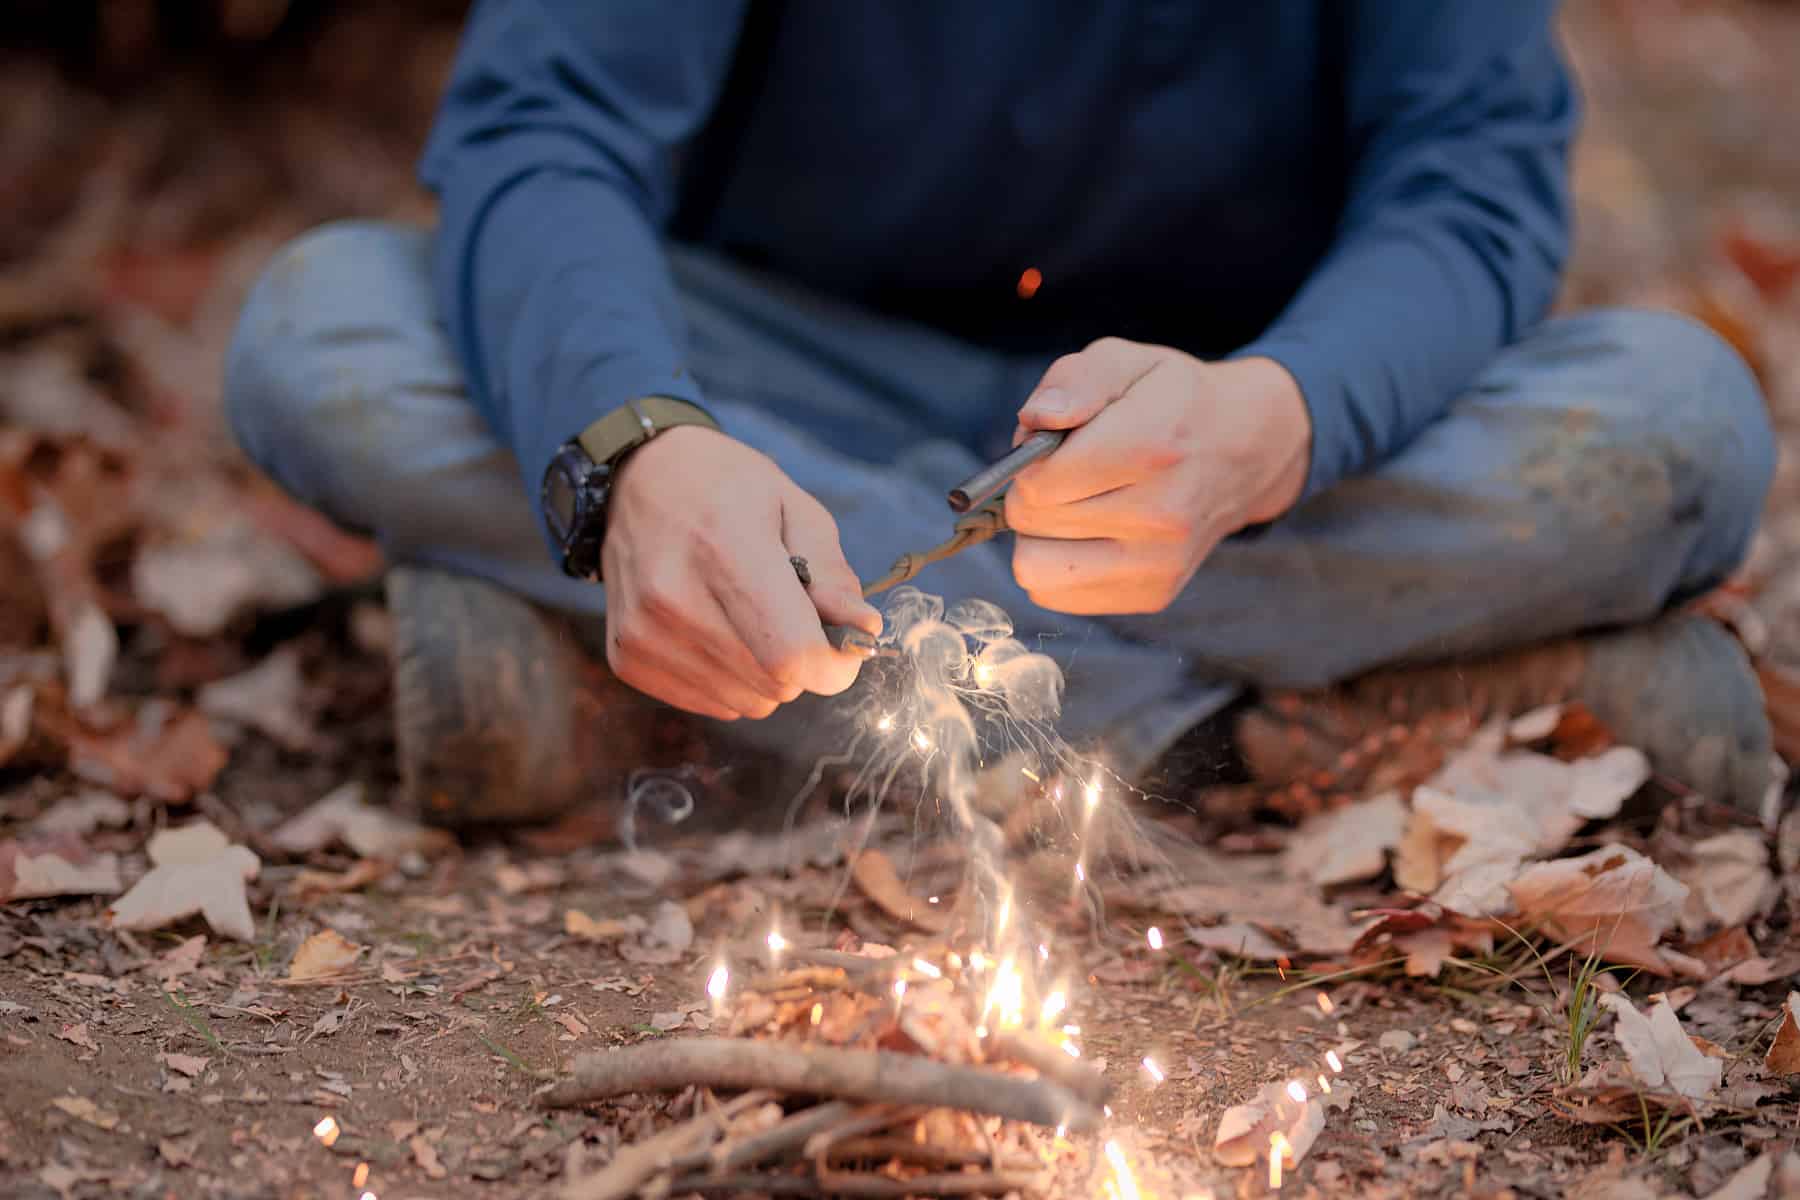 7 Wilderness Survival Tips to Stay Safe and Protected